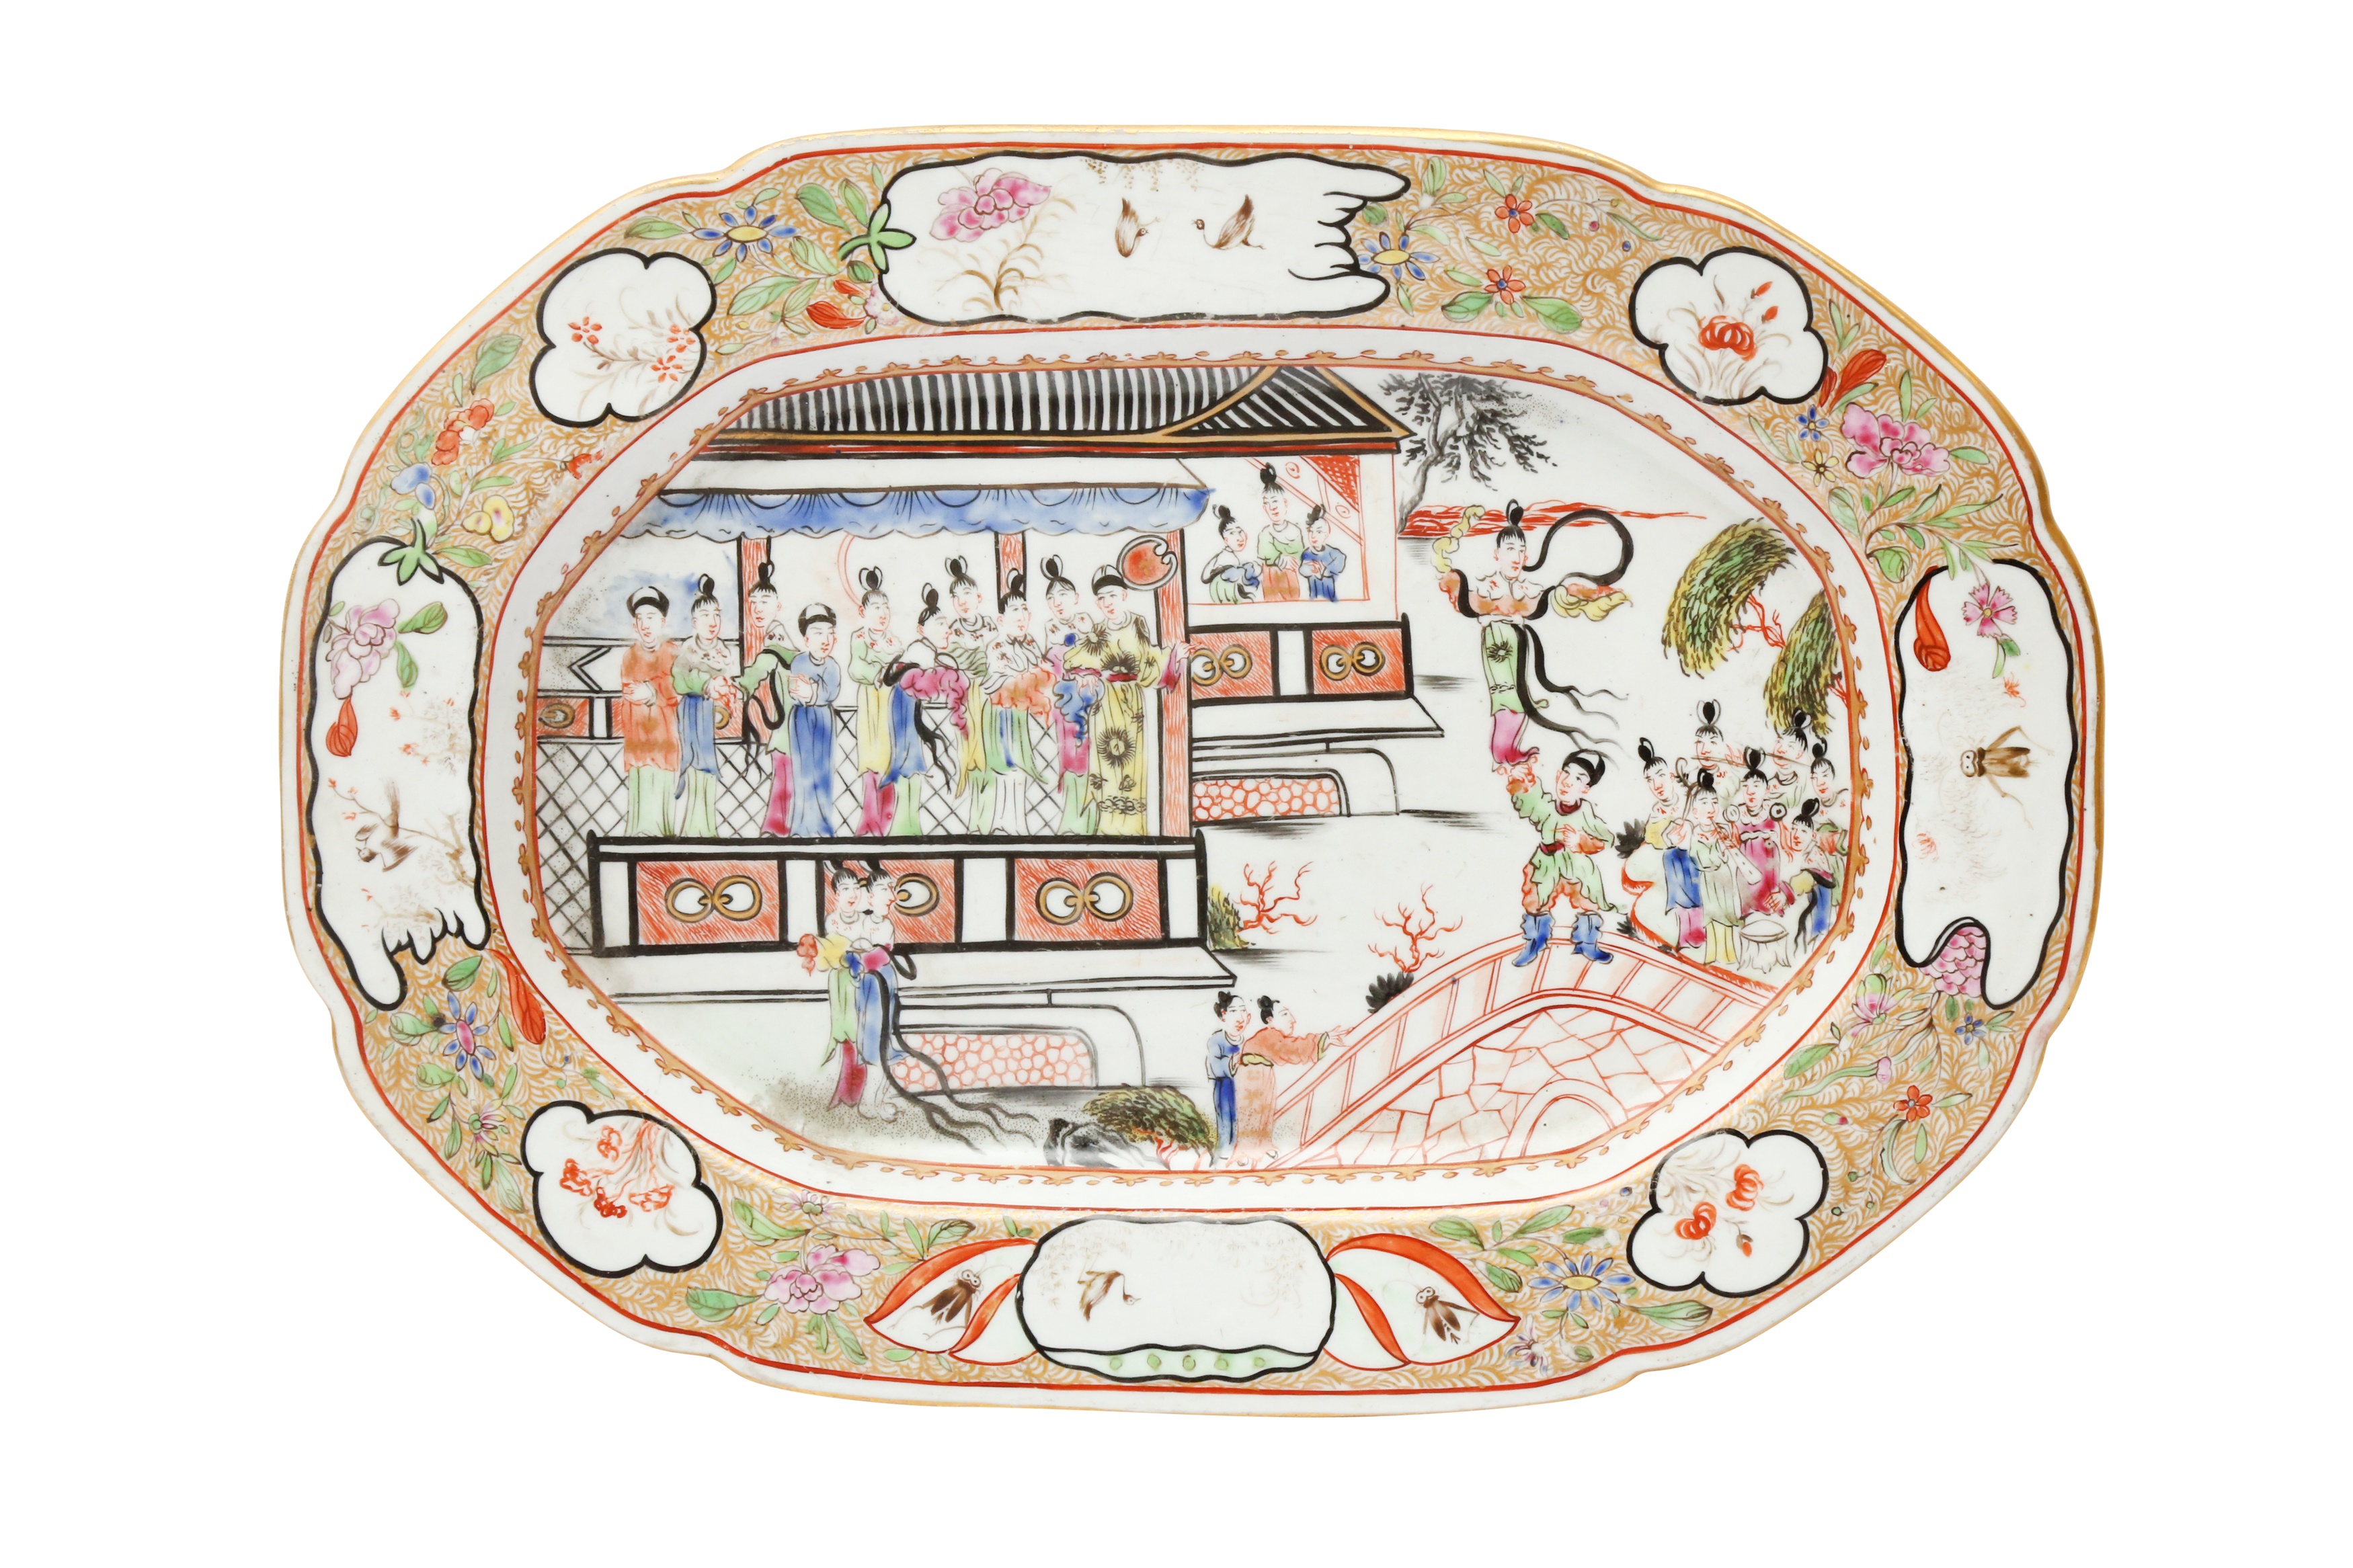 A PAIR OF CHINESE EXPORT FAMILLE-ROSE 'FIGURATIVE' DISHES 清雍正 外銷粉彩人物故事圖紋盤一對 - Image 3 of 18